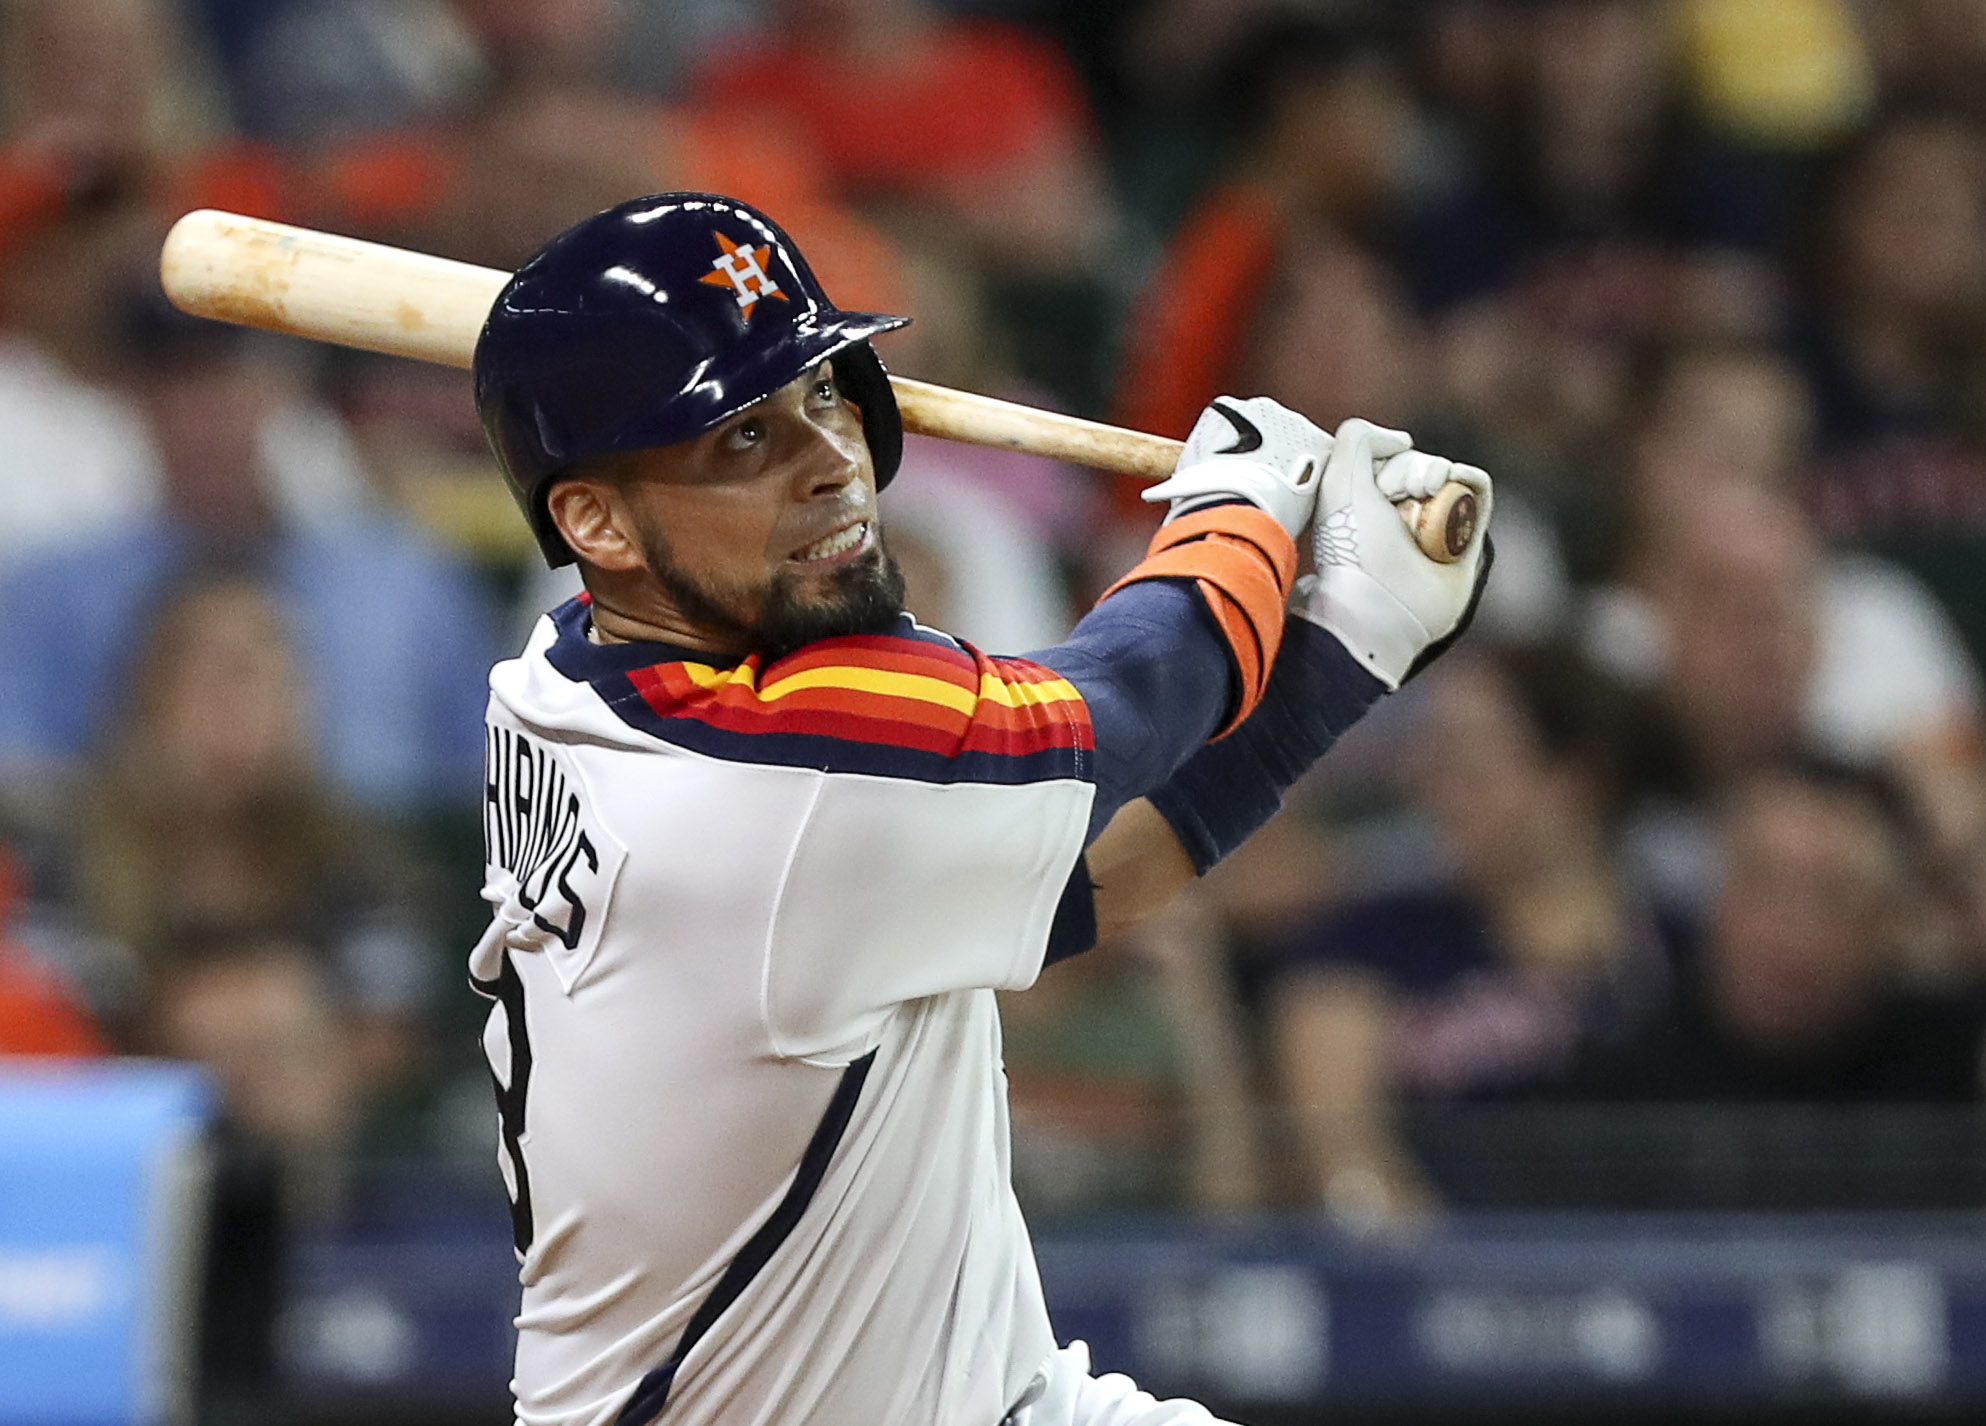 Astros: Inconsistent closers since Pujols home run